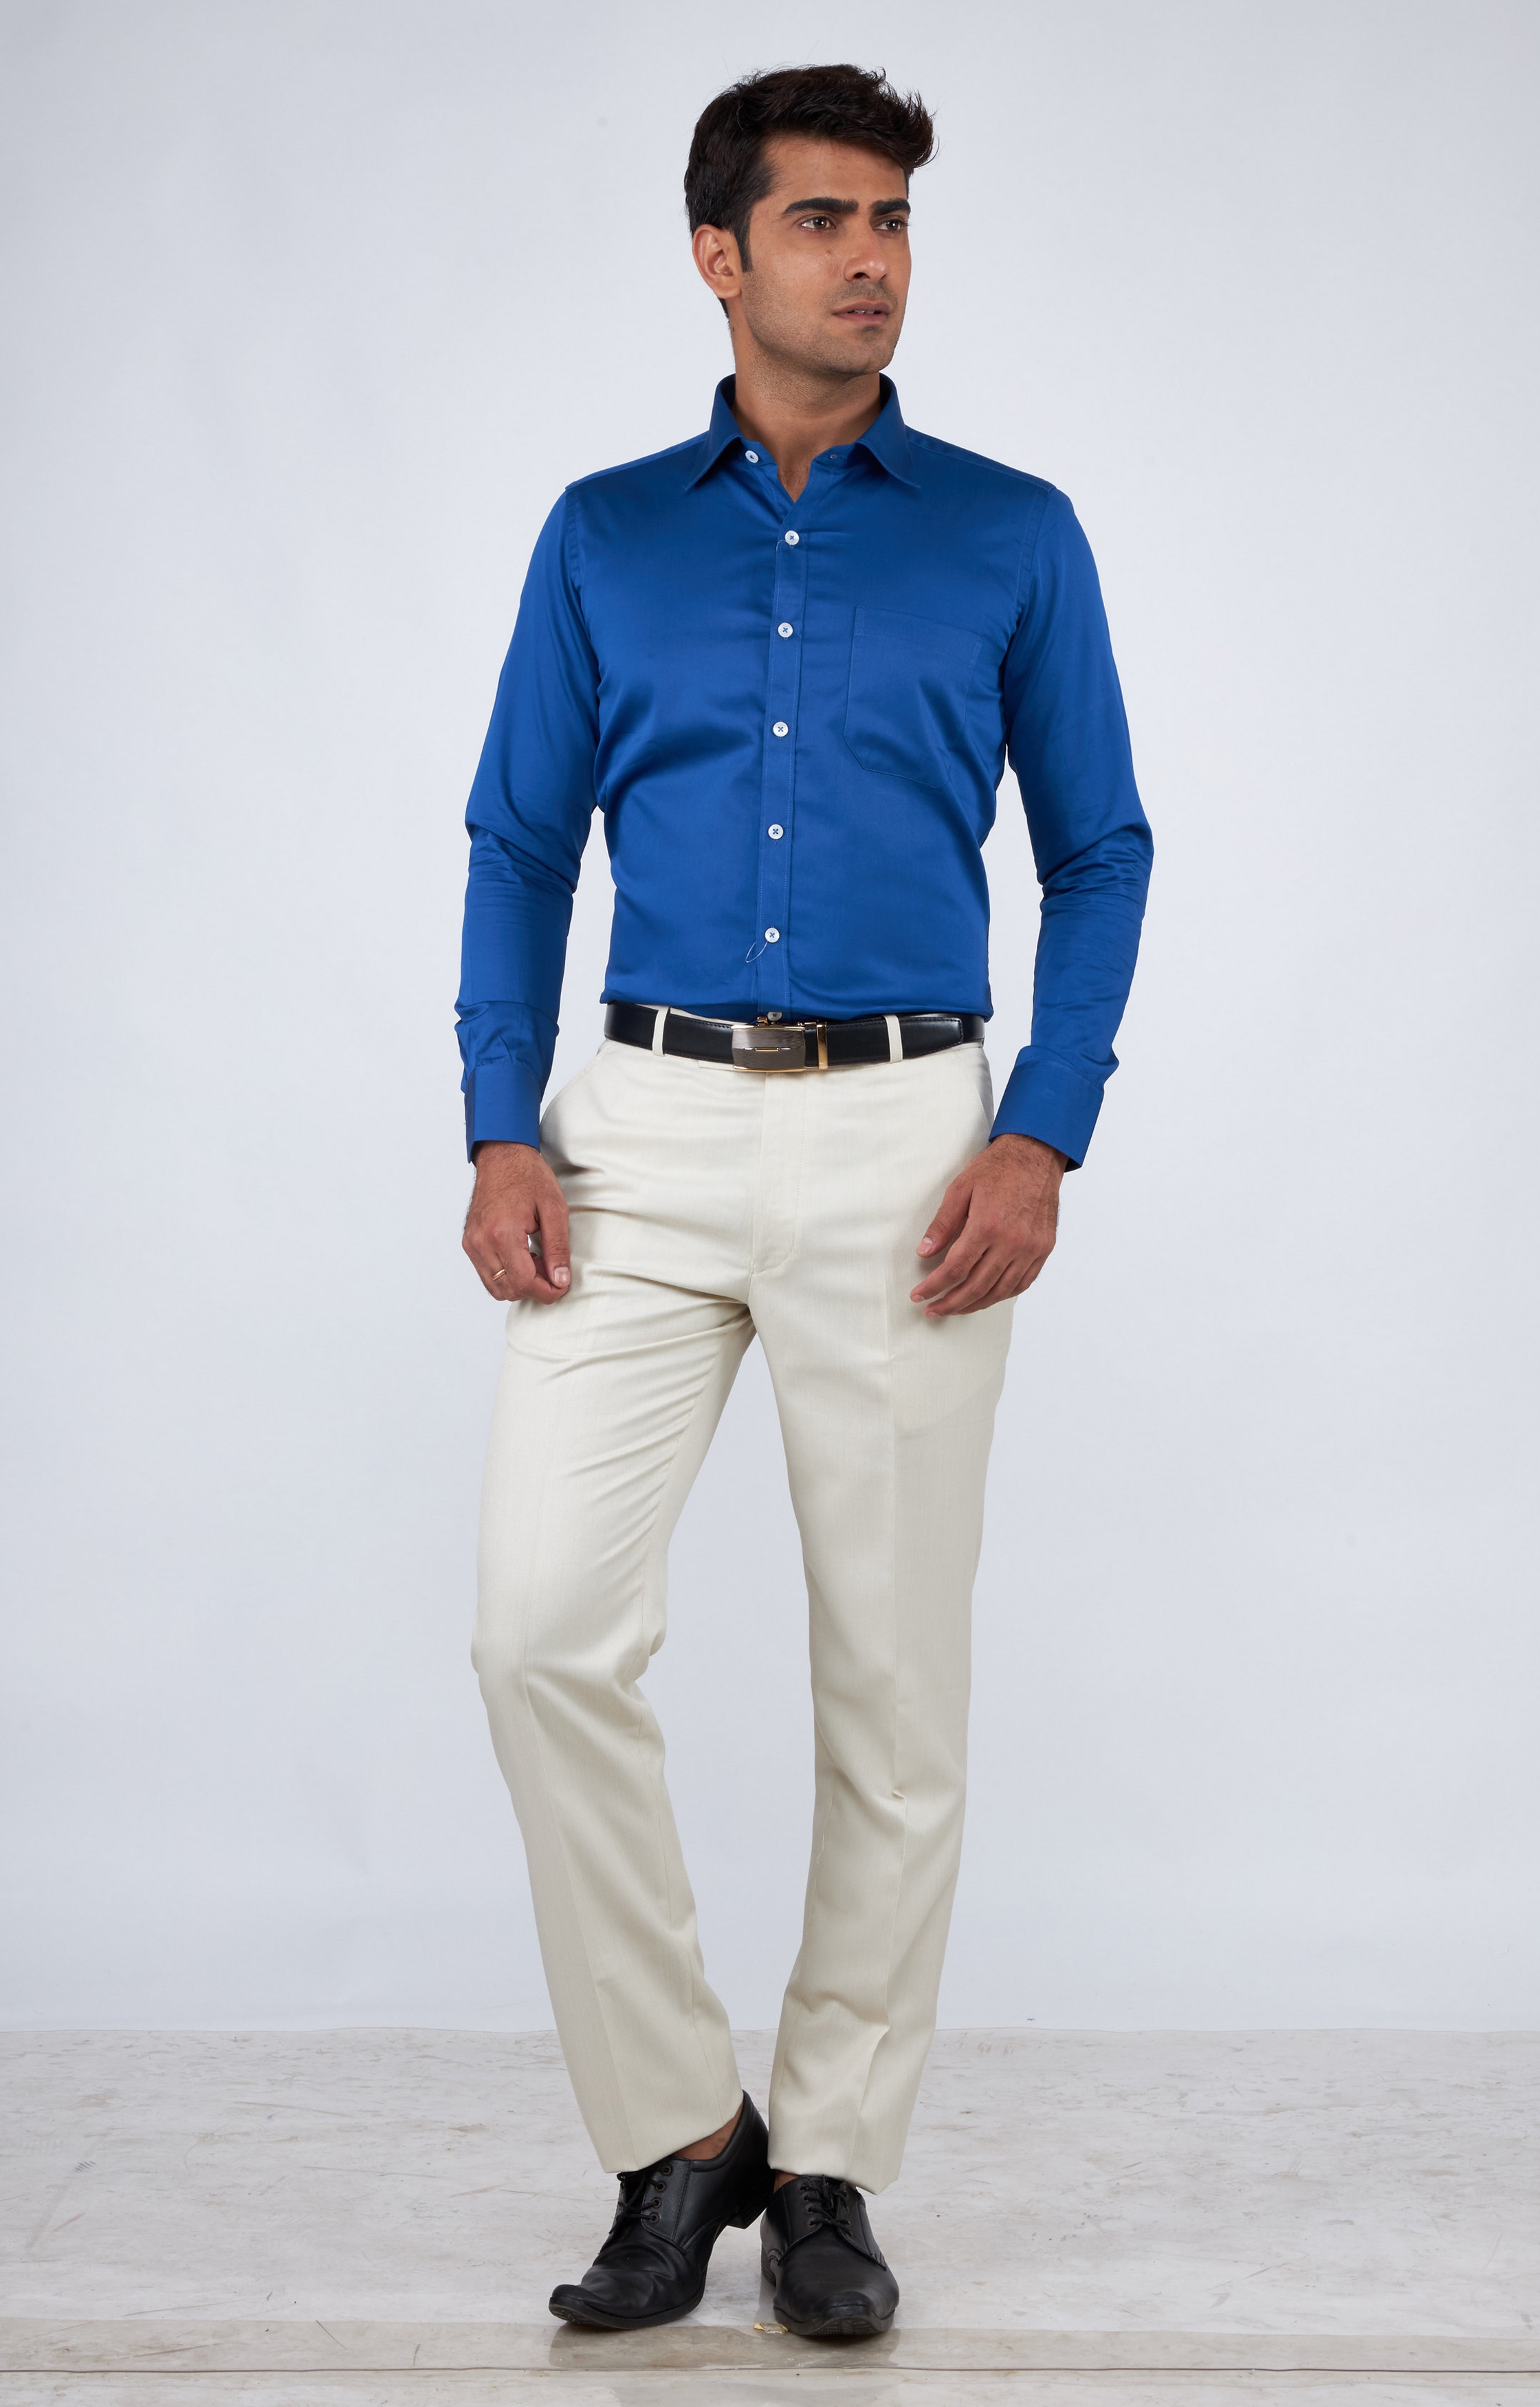 Do navy blue shirts and white pants look good together  Quora